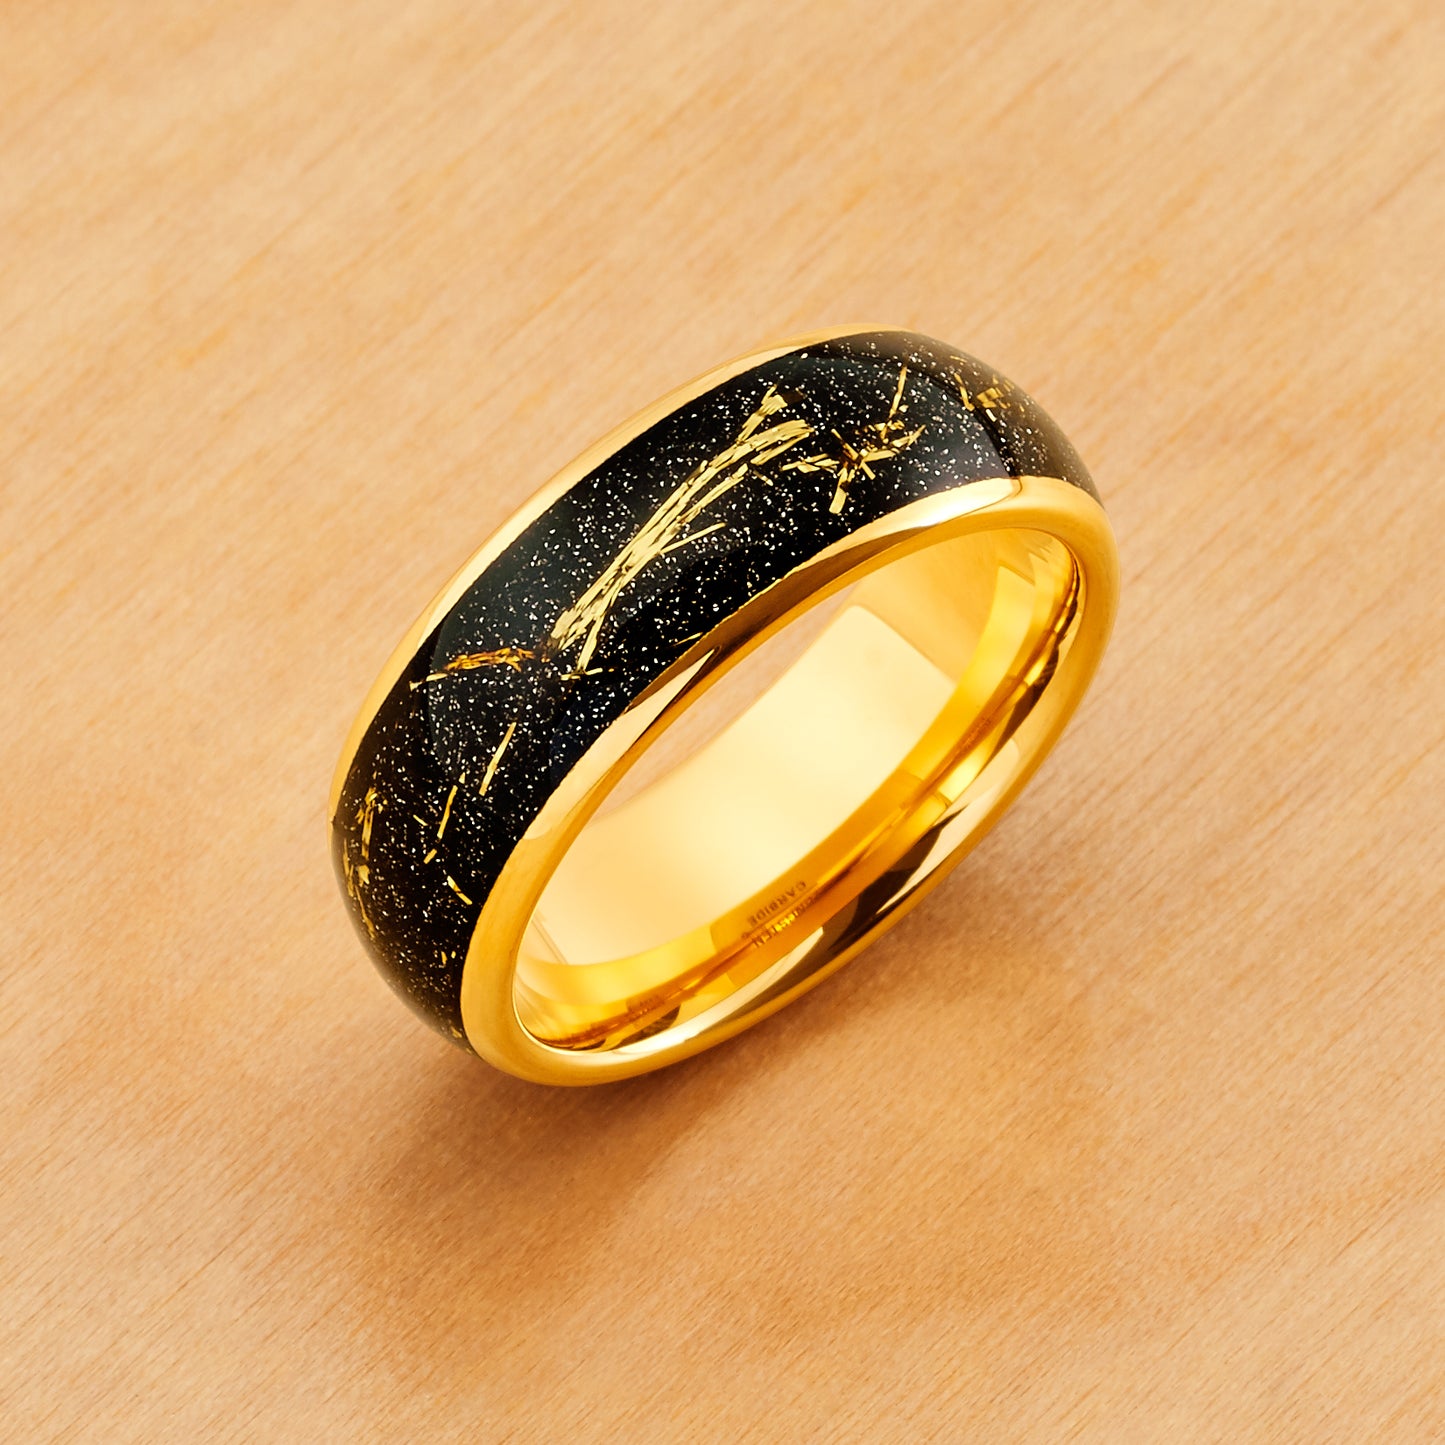 TR831 - Yellow Plating - Tungsten Ring 8mm, Yellow Gold IP Plated Domed Ring with Imitation Meteorite Inlay